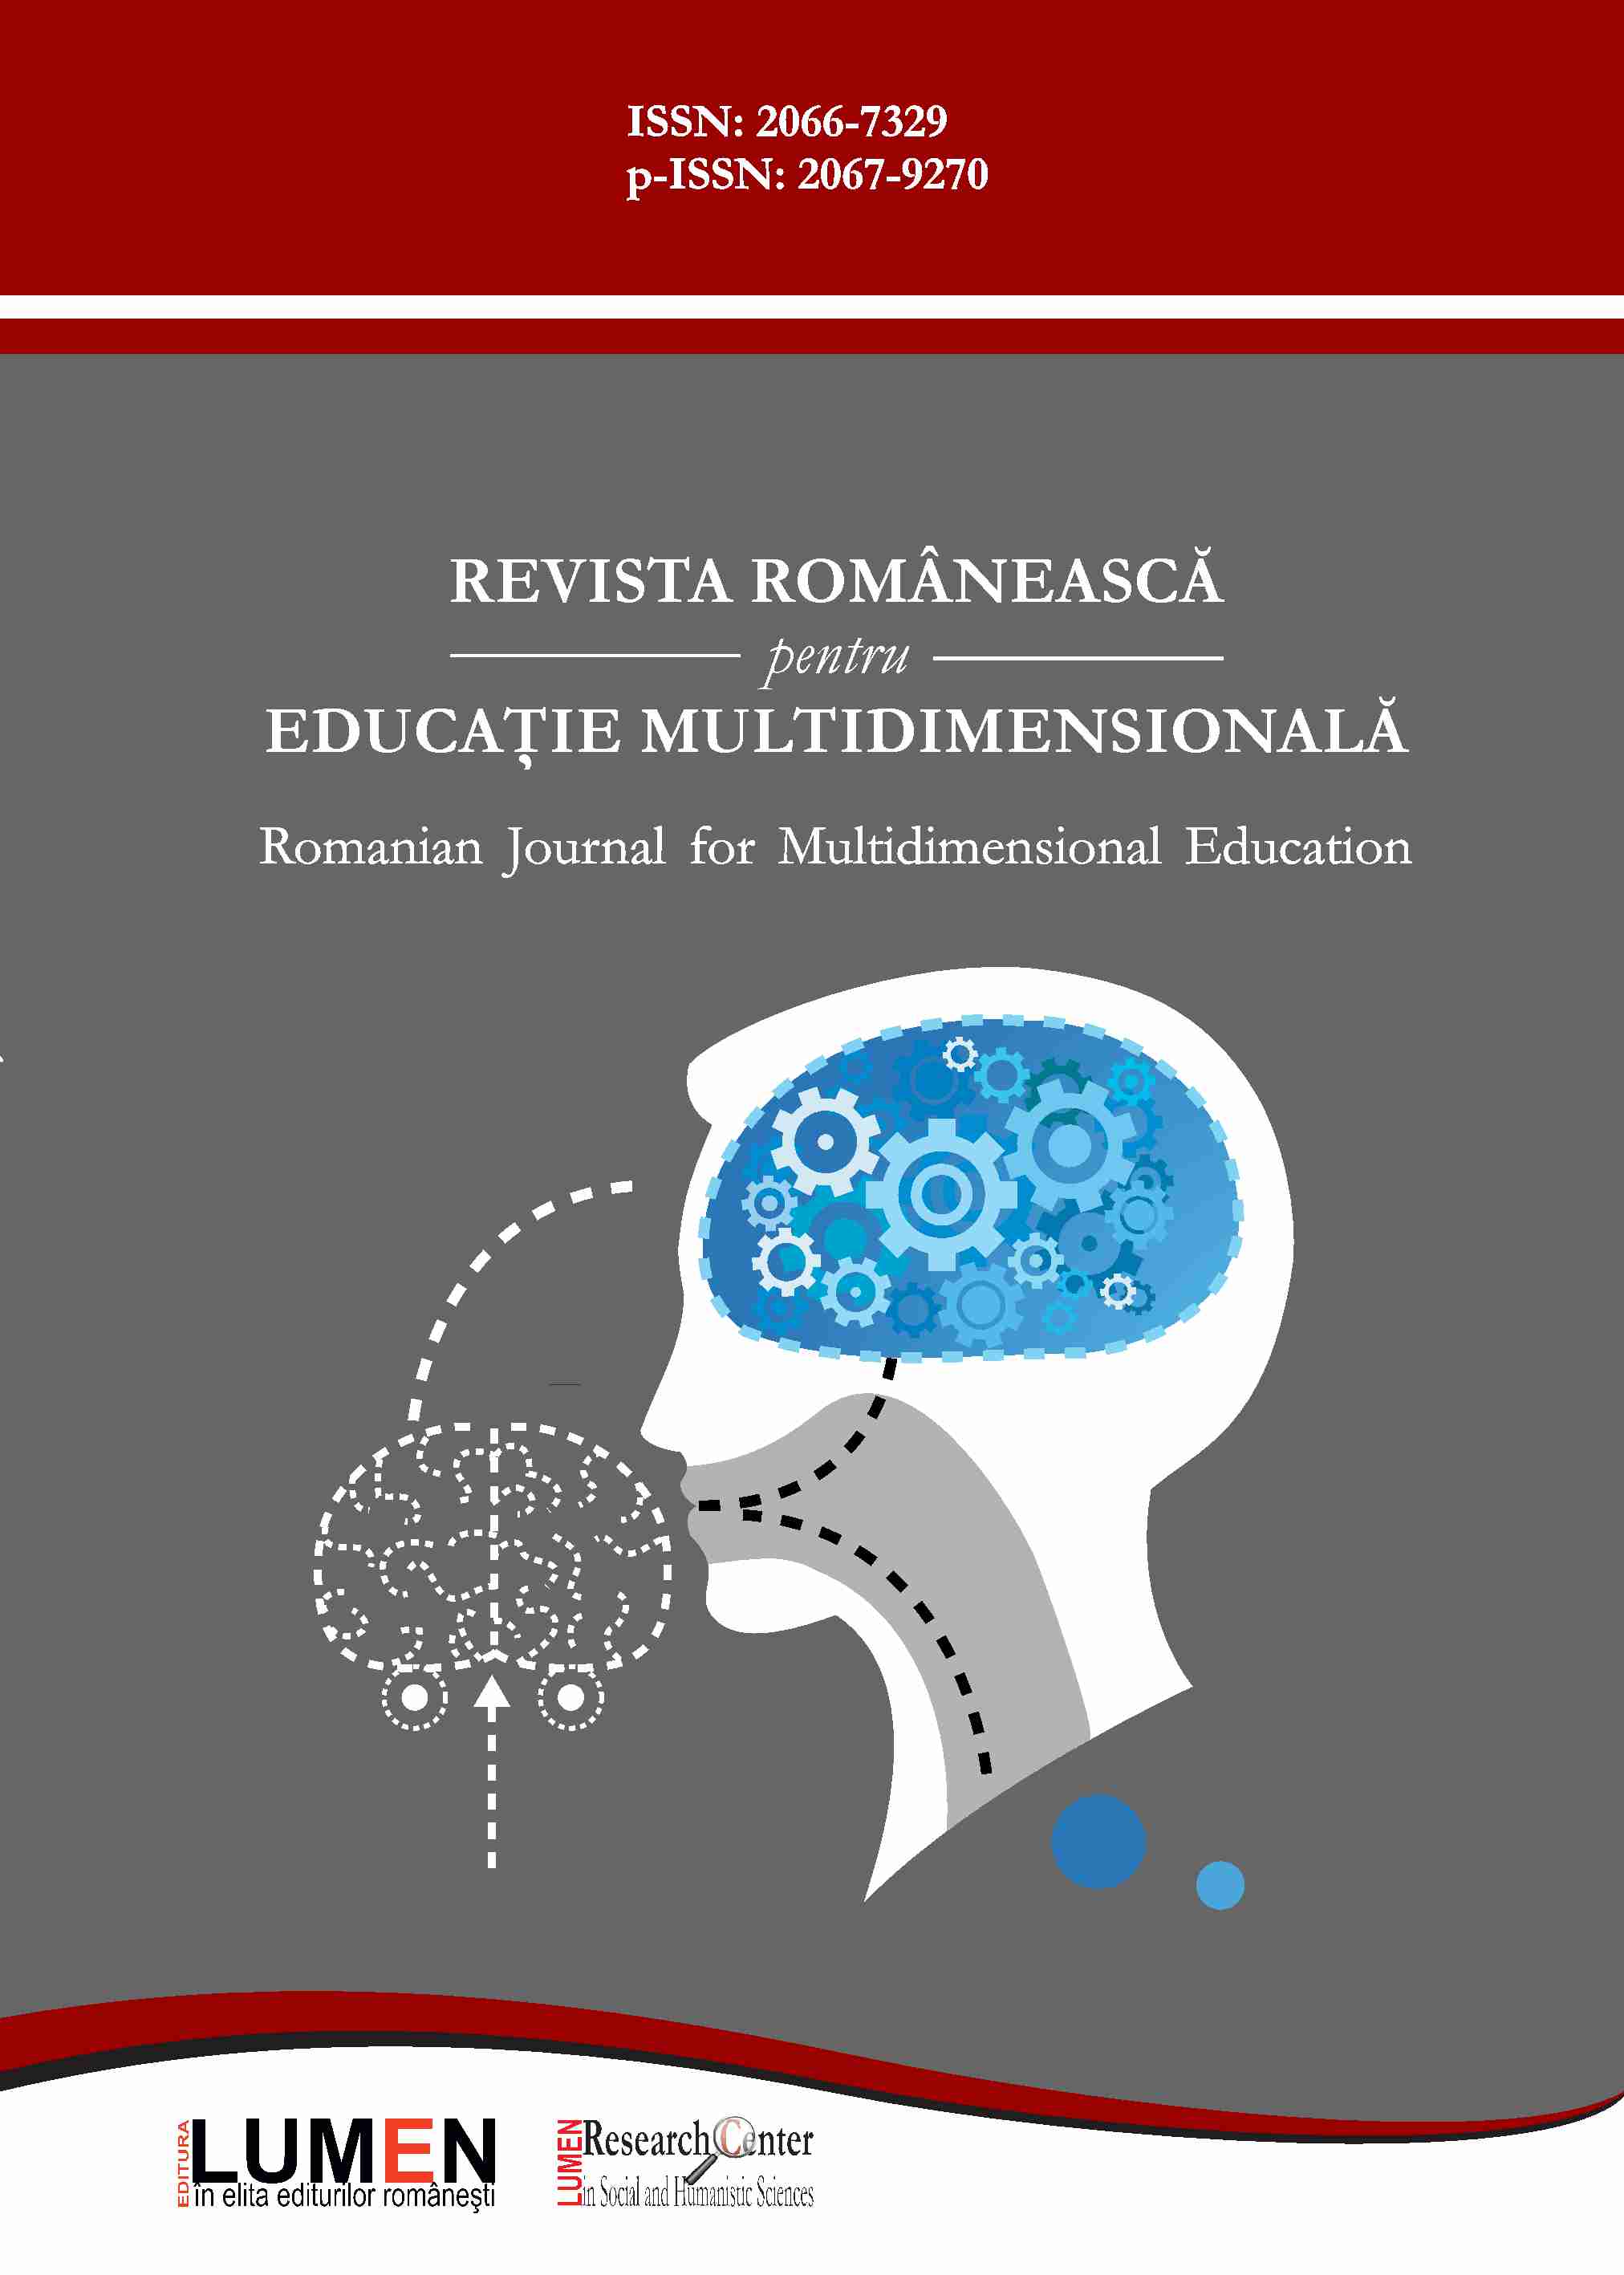 Values and Interferences of Psychomotricity in Education – a Study of the Domain-Specific Literature